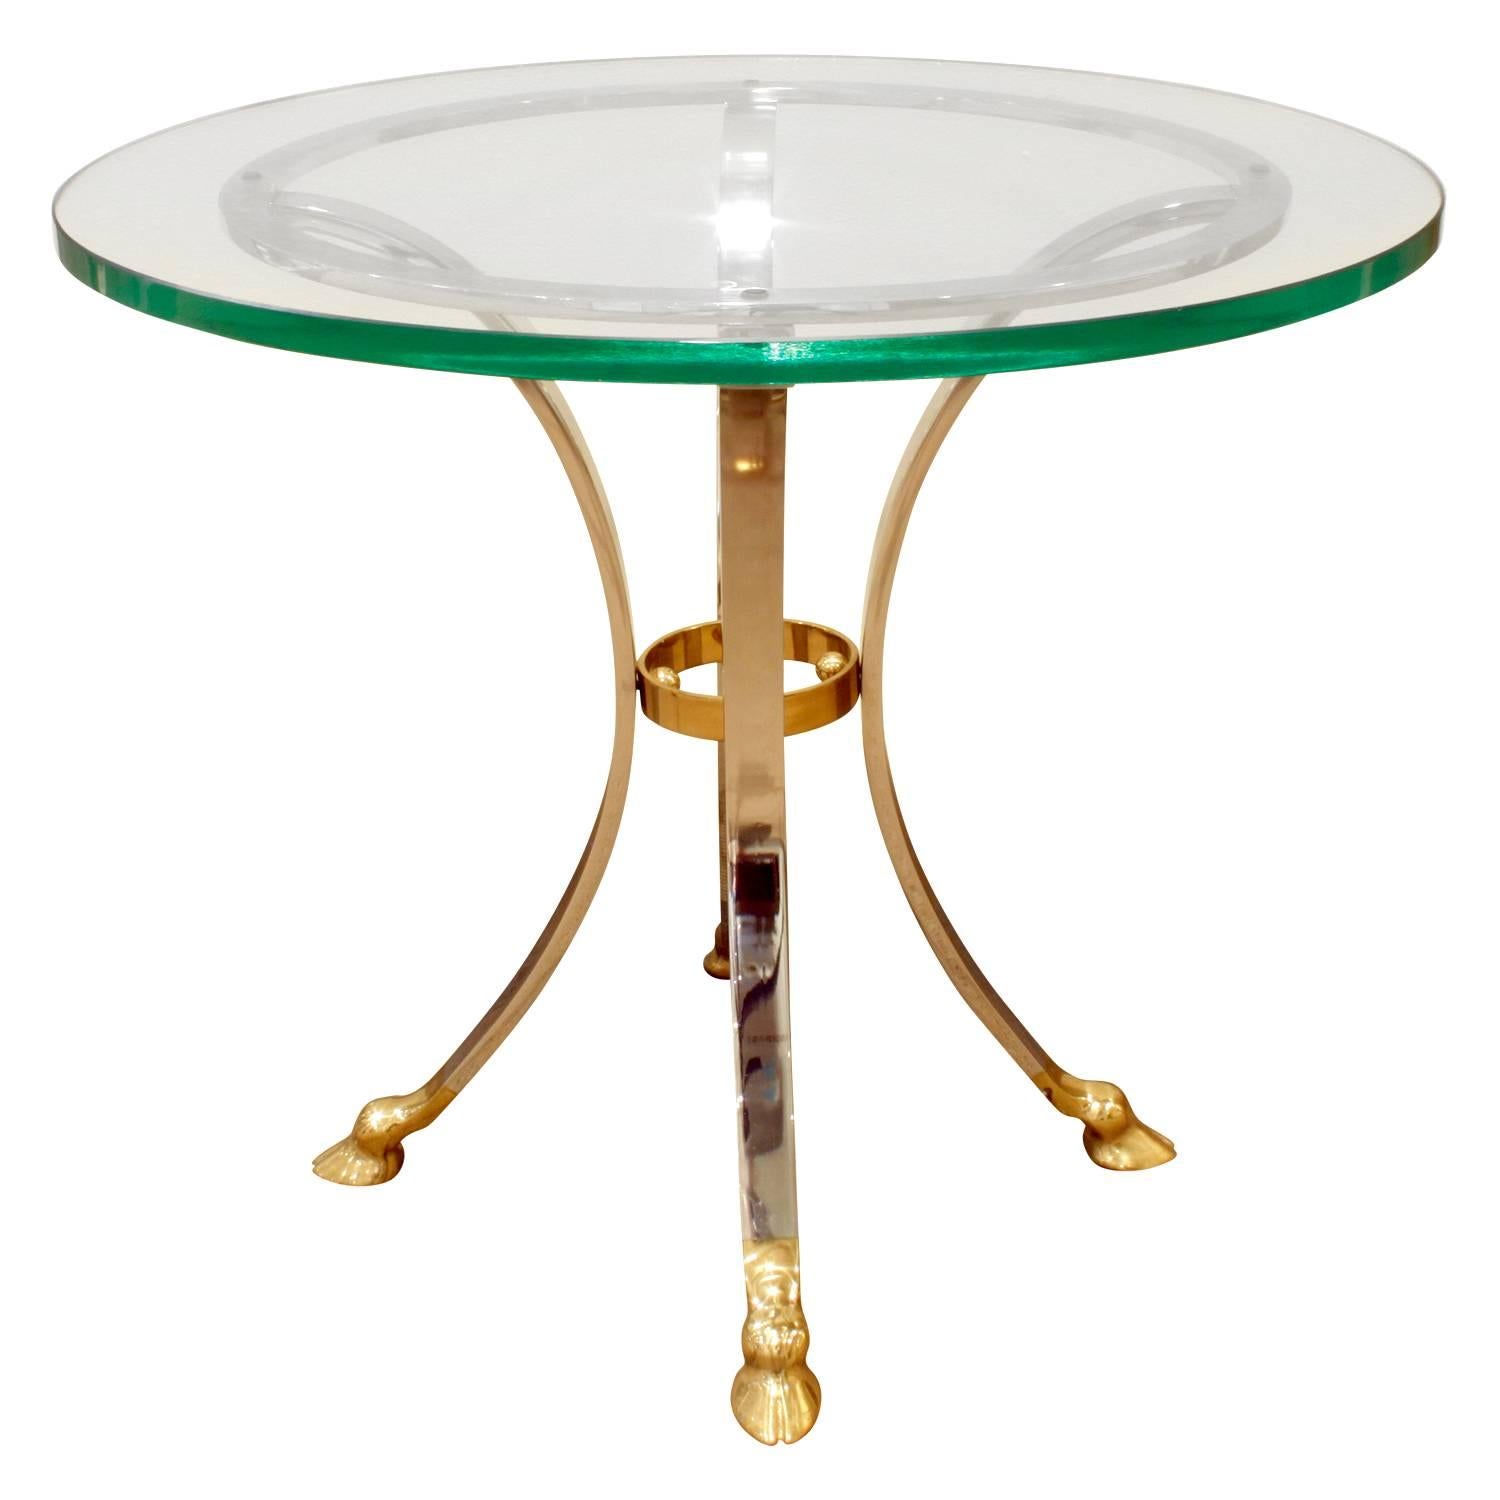 Neoclassical style end table with hoof motif in brass and steel with glass top, American, 1960s.